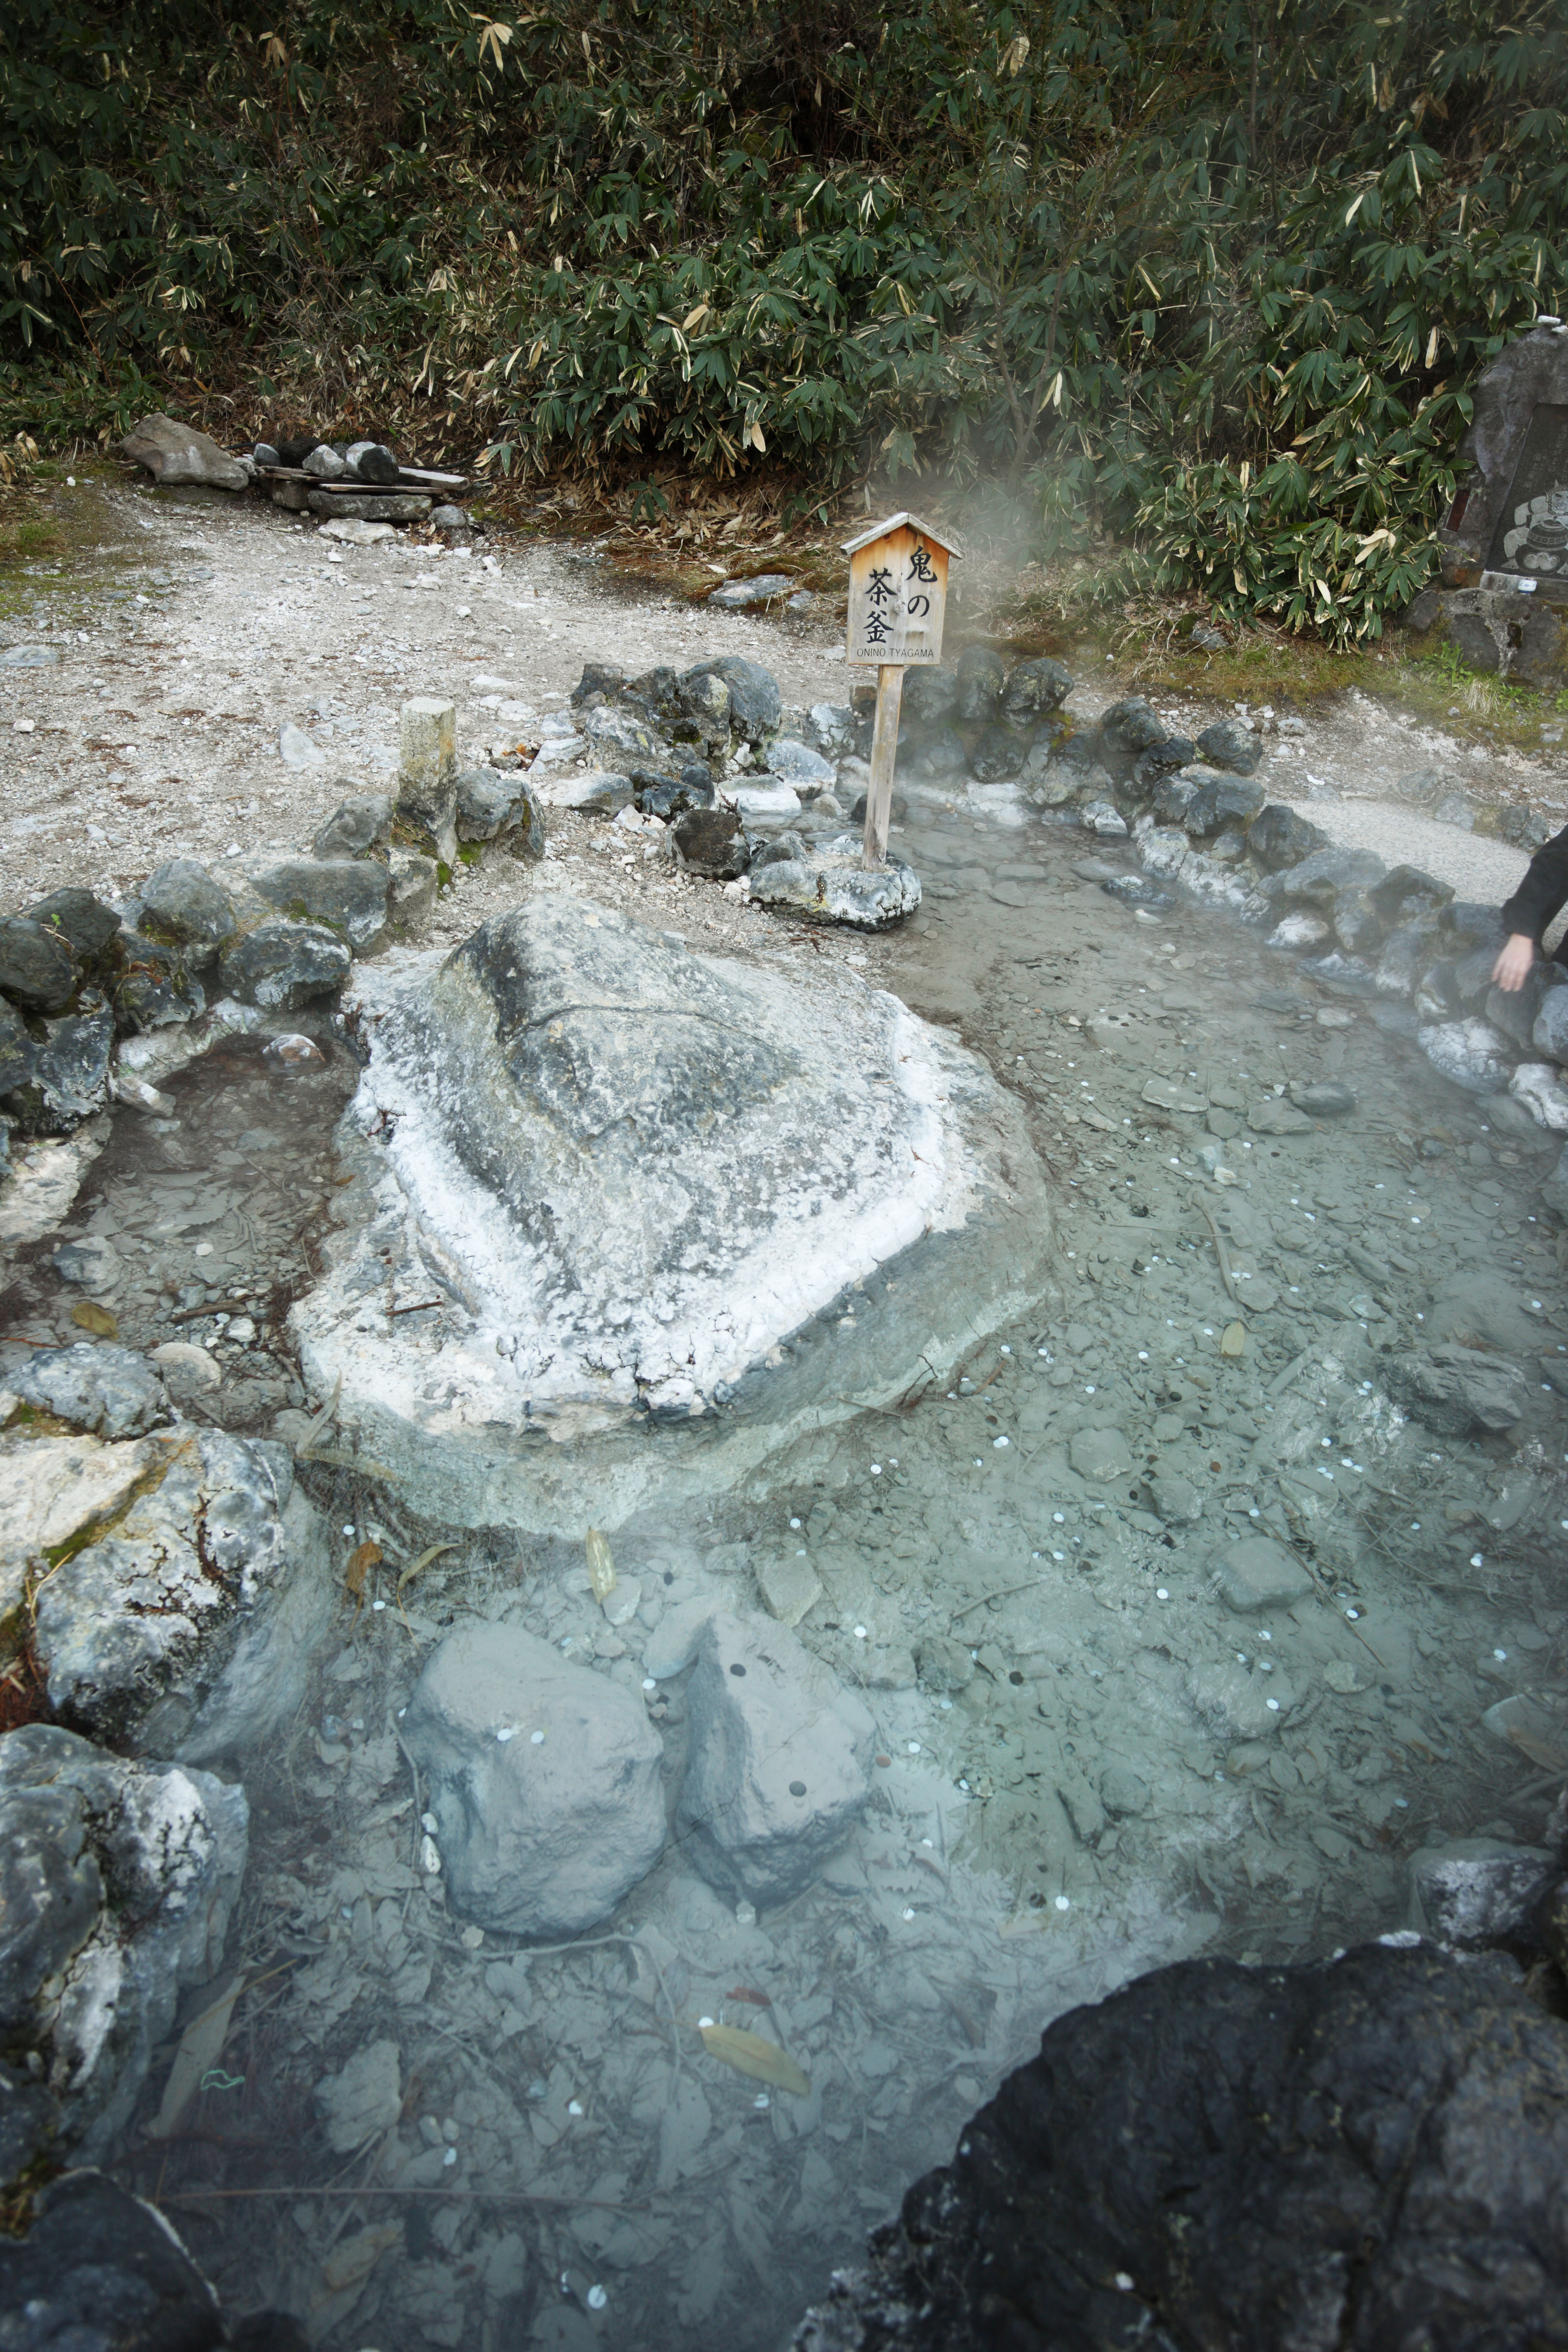 photo,material,free,landscape,picture,stock photo,Creative Commons,The teakettle of the Kusatsu hot spring ogre, rock, hot spring, Sulfur, Hot water